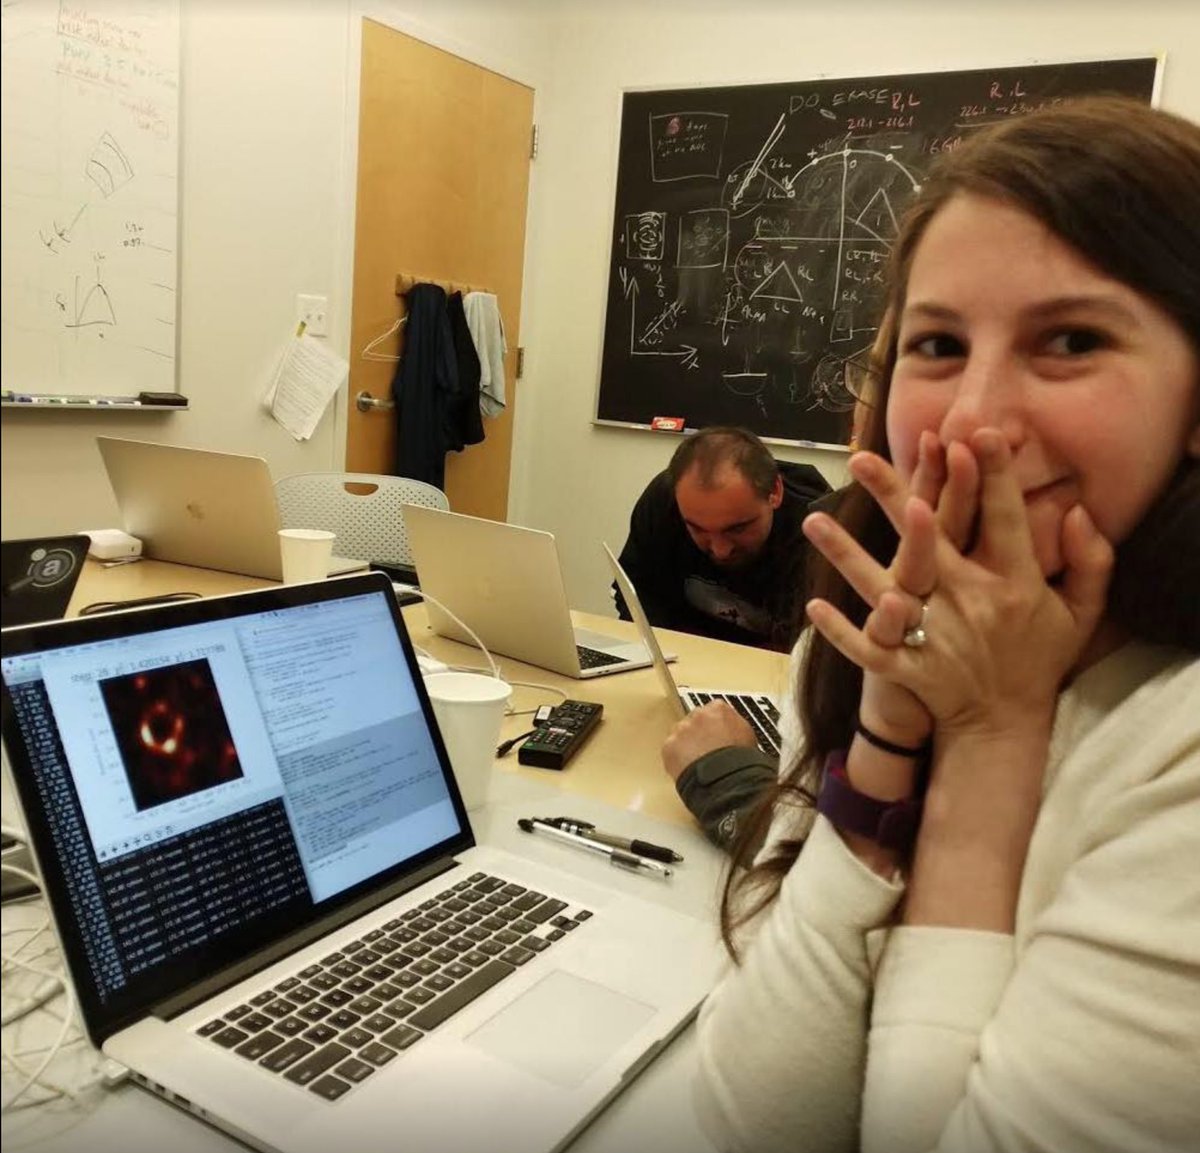 #otd in 2019 scientists released the first-ever photo of a black hole. Here’s the moment that then-PhD student Katie Bouman and colleagues first processed the image: nyti.ms/2D9Wr4B